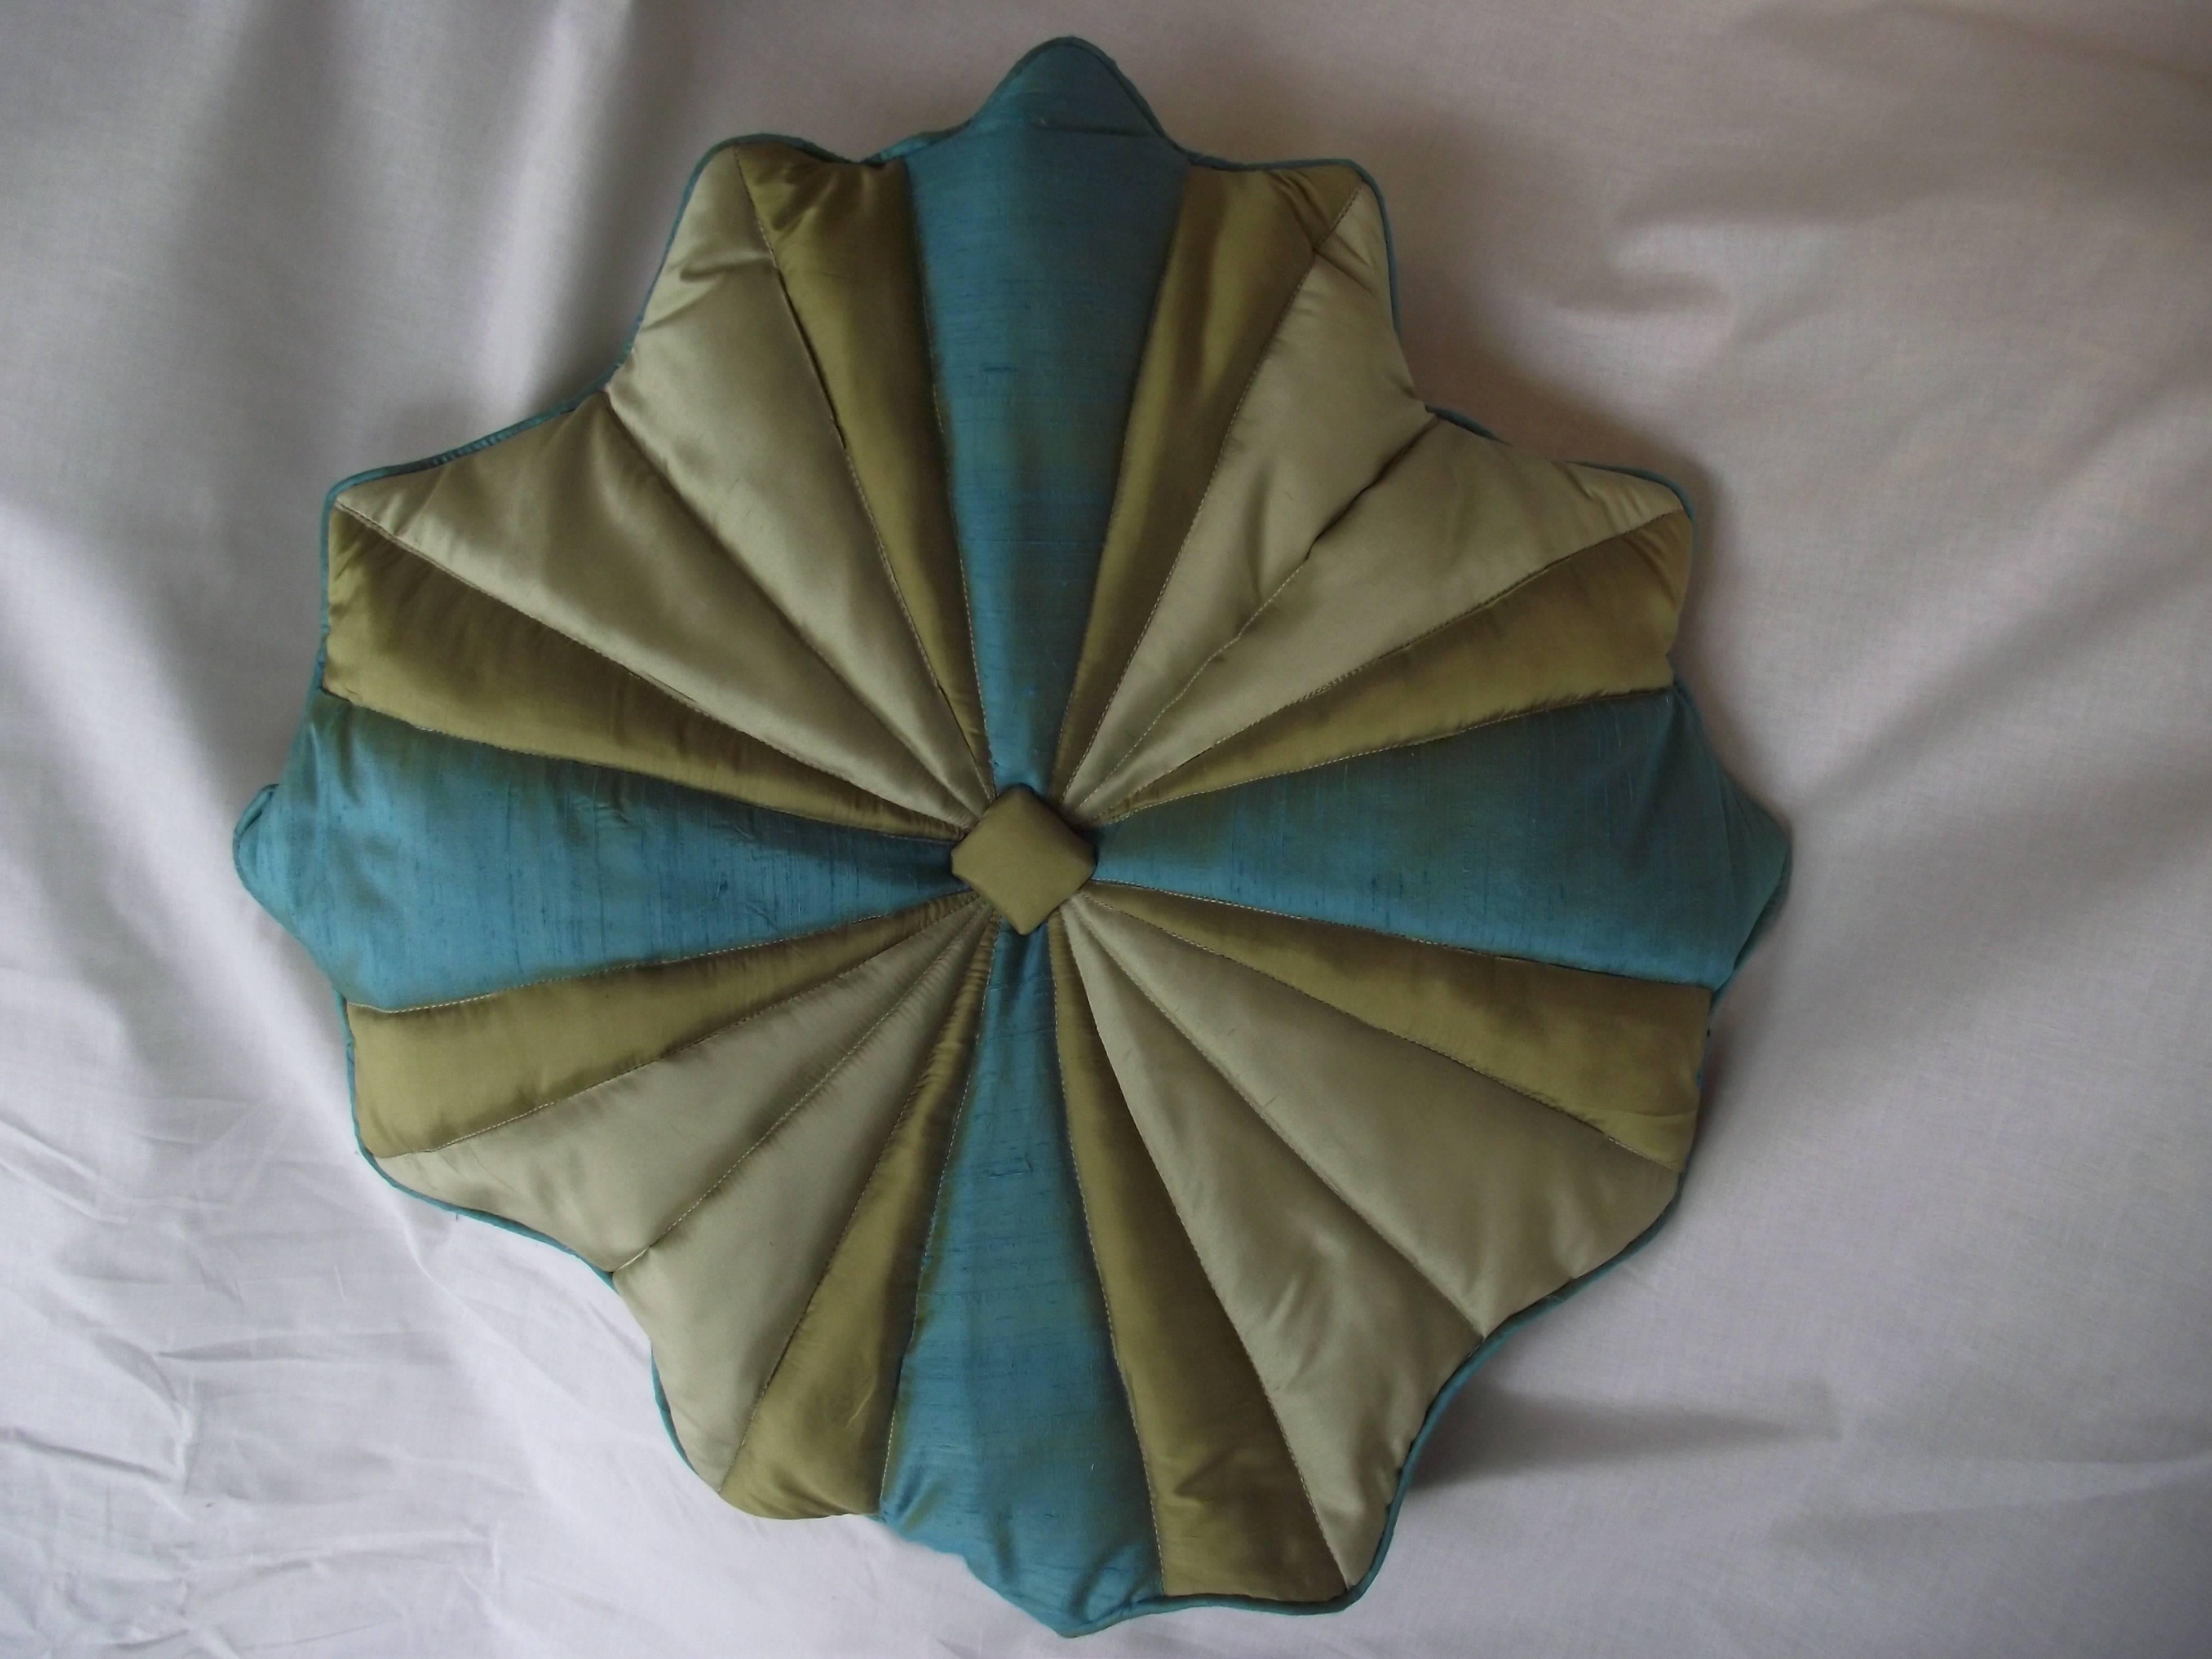 This another original design from Gantt's Design Studio. This striking pillow is made joining turquoise dupioni silk and gold shantung silk and quilting the cover at the seams. 

The back is solid gold silk with the same pattern quilted into